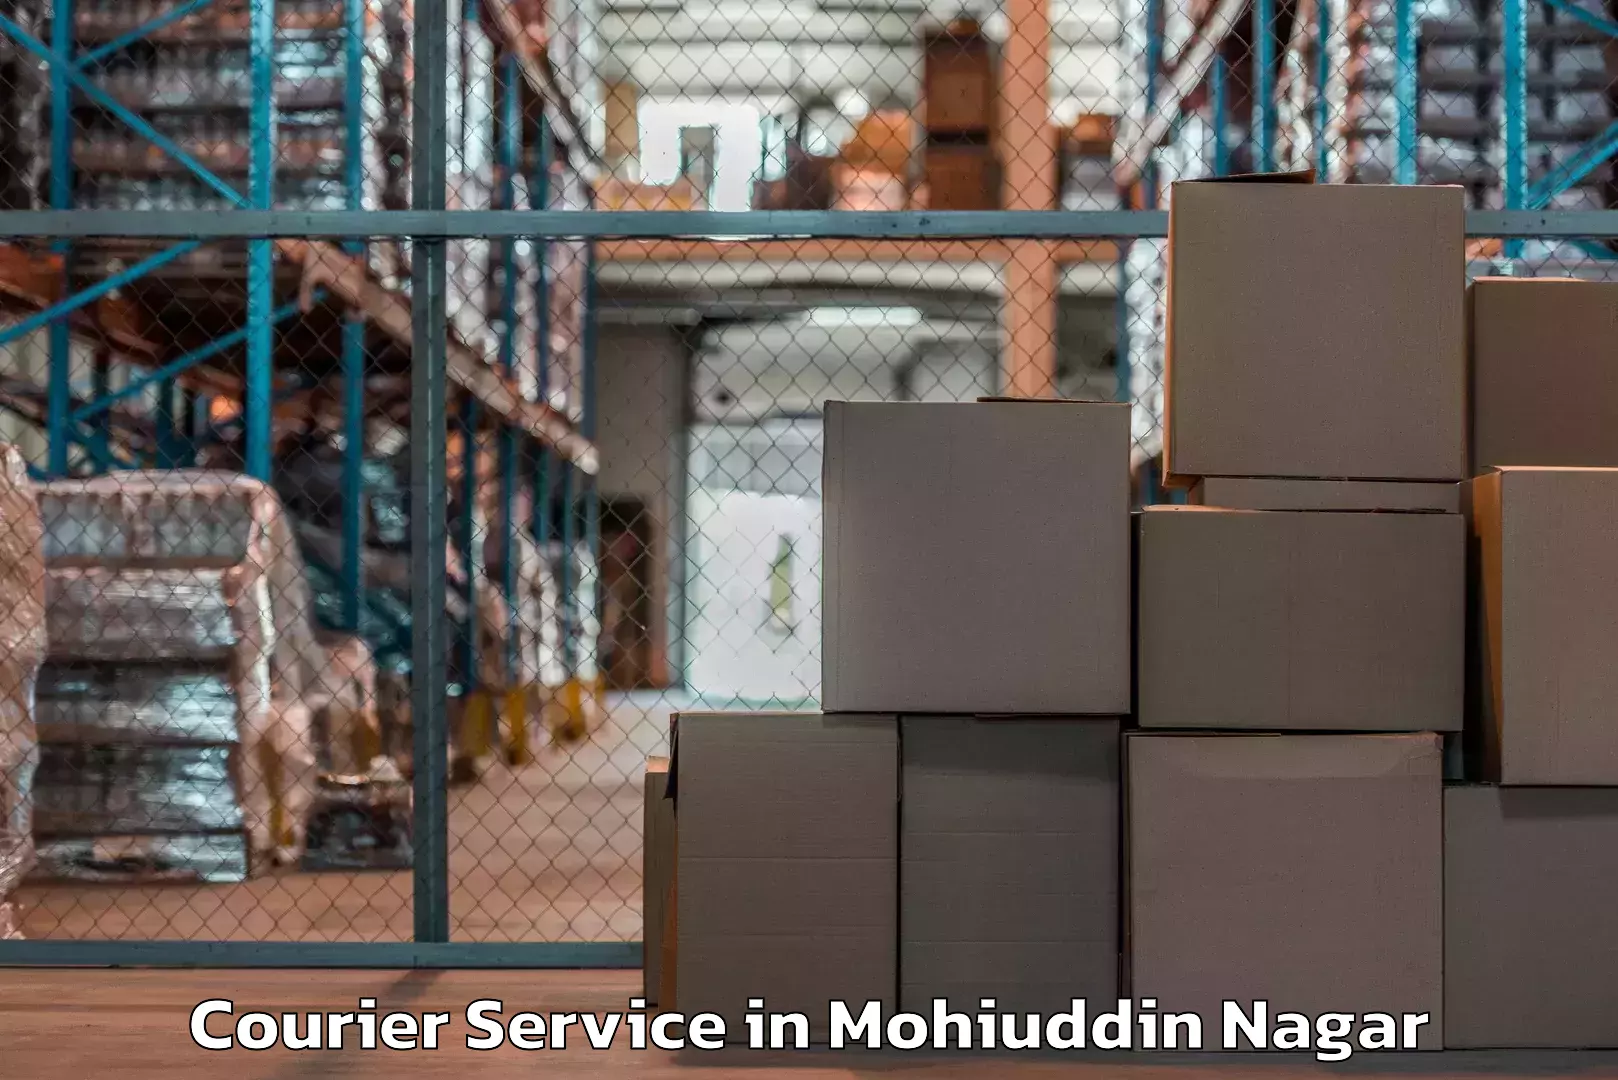 Integrated shipping services in Mohiuddin Nagar